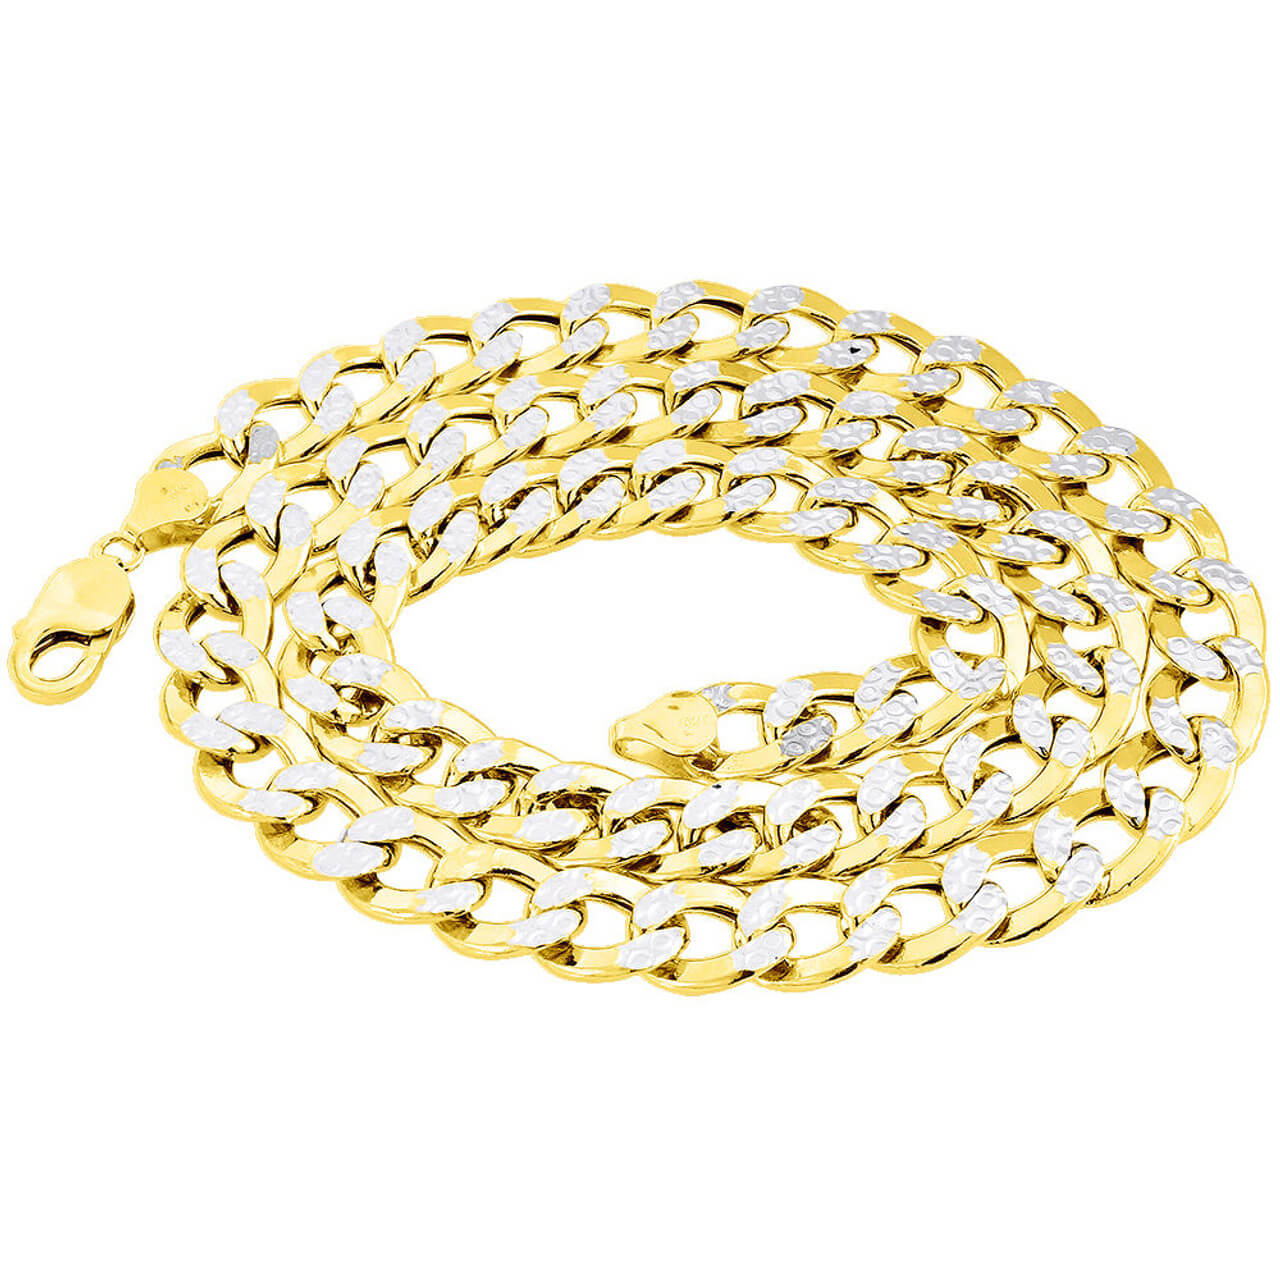 10k Yellow Gold Chiseled Cuban Curb Chain D/C Pave 10.75 mm Necklace 22-30"